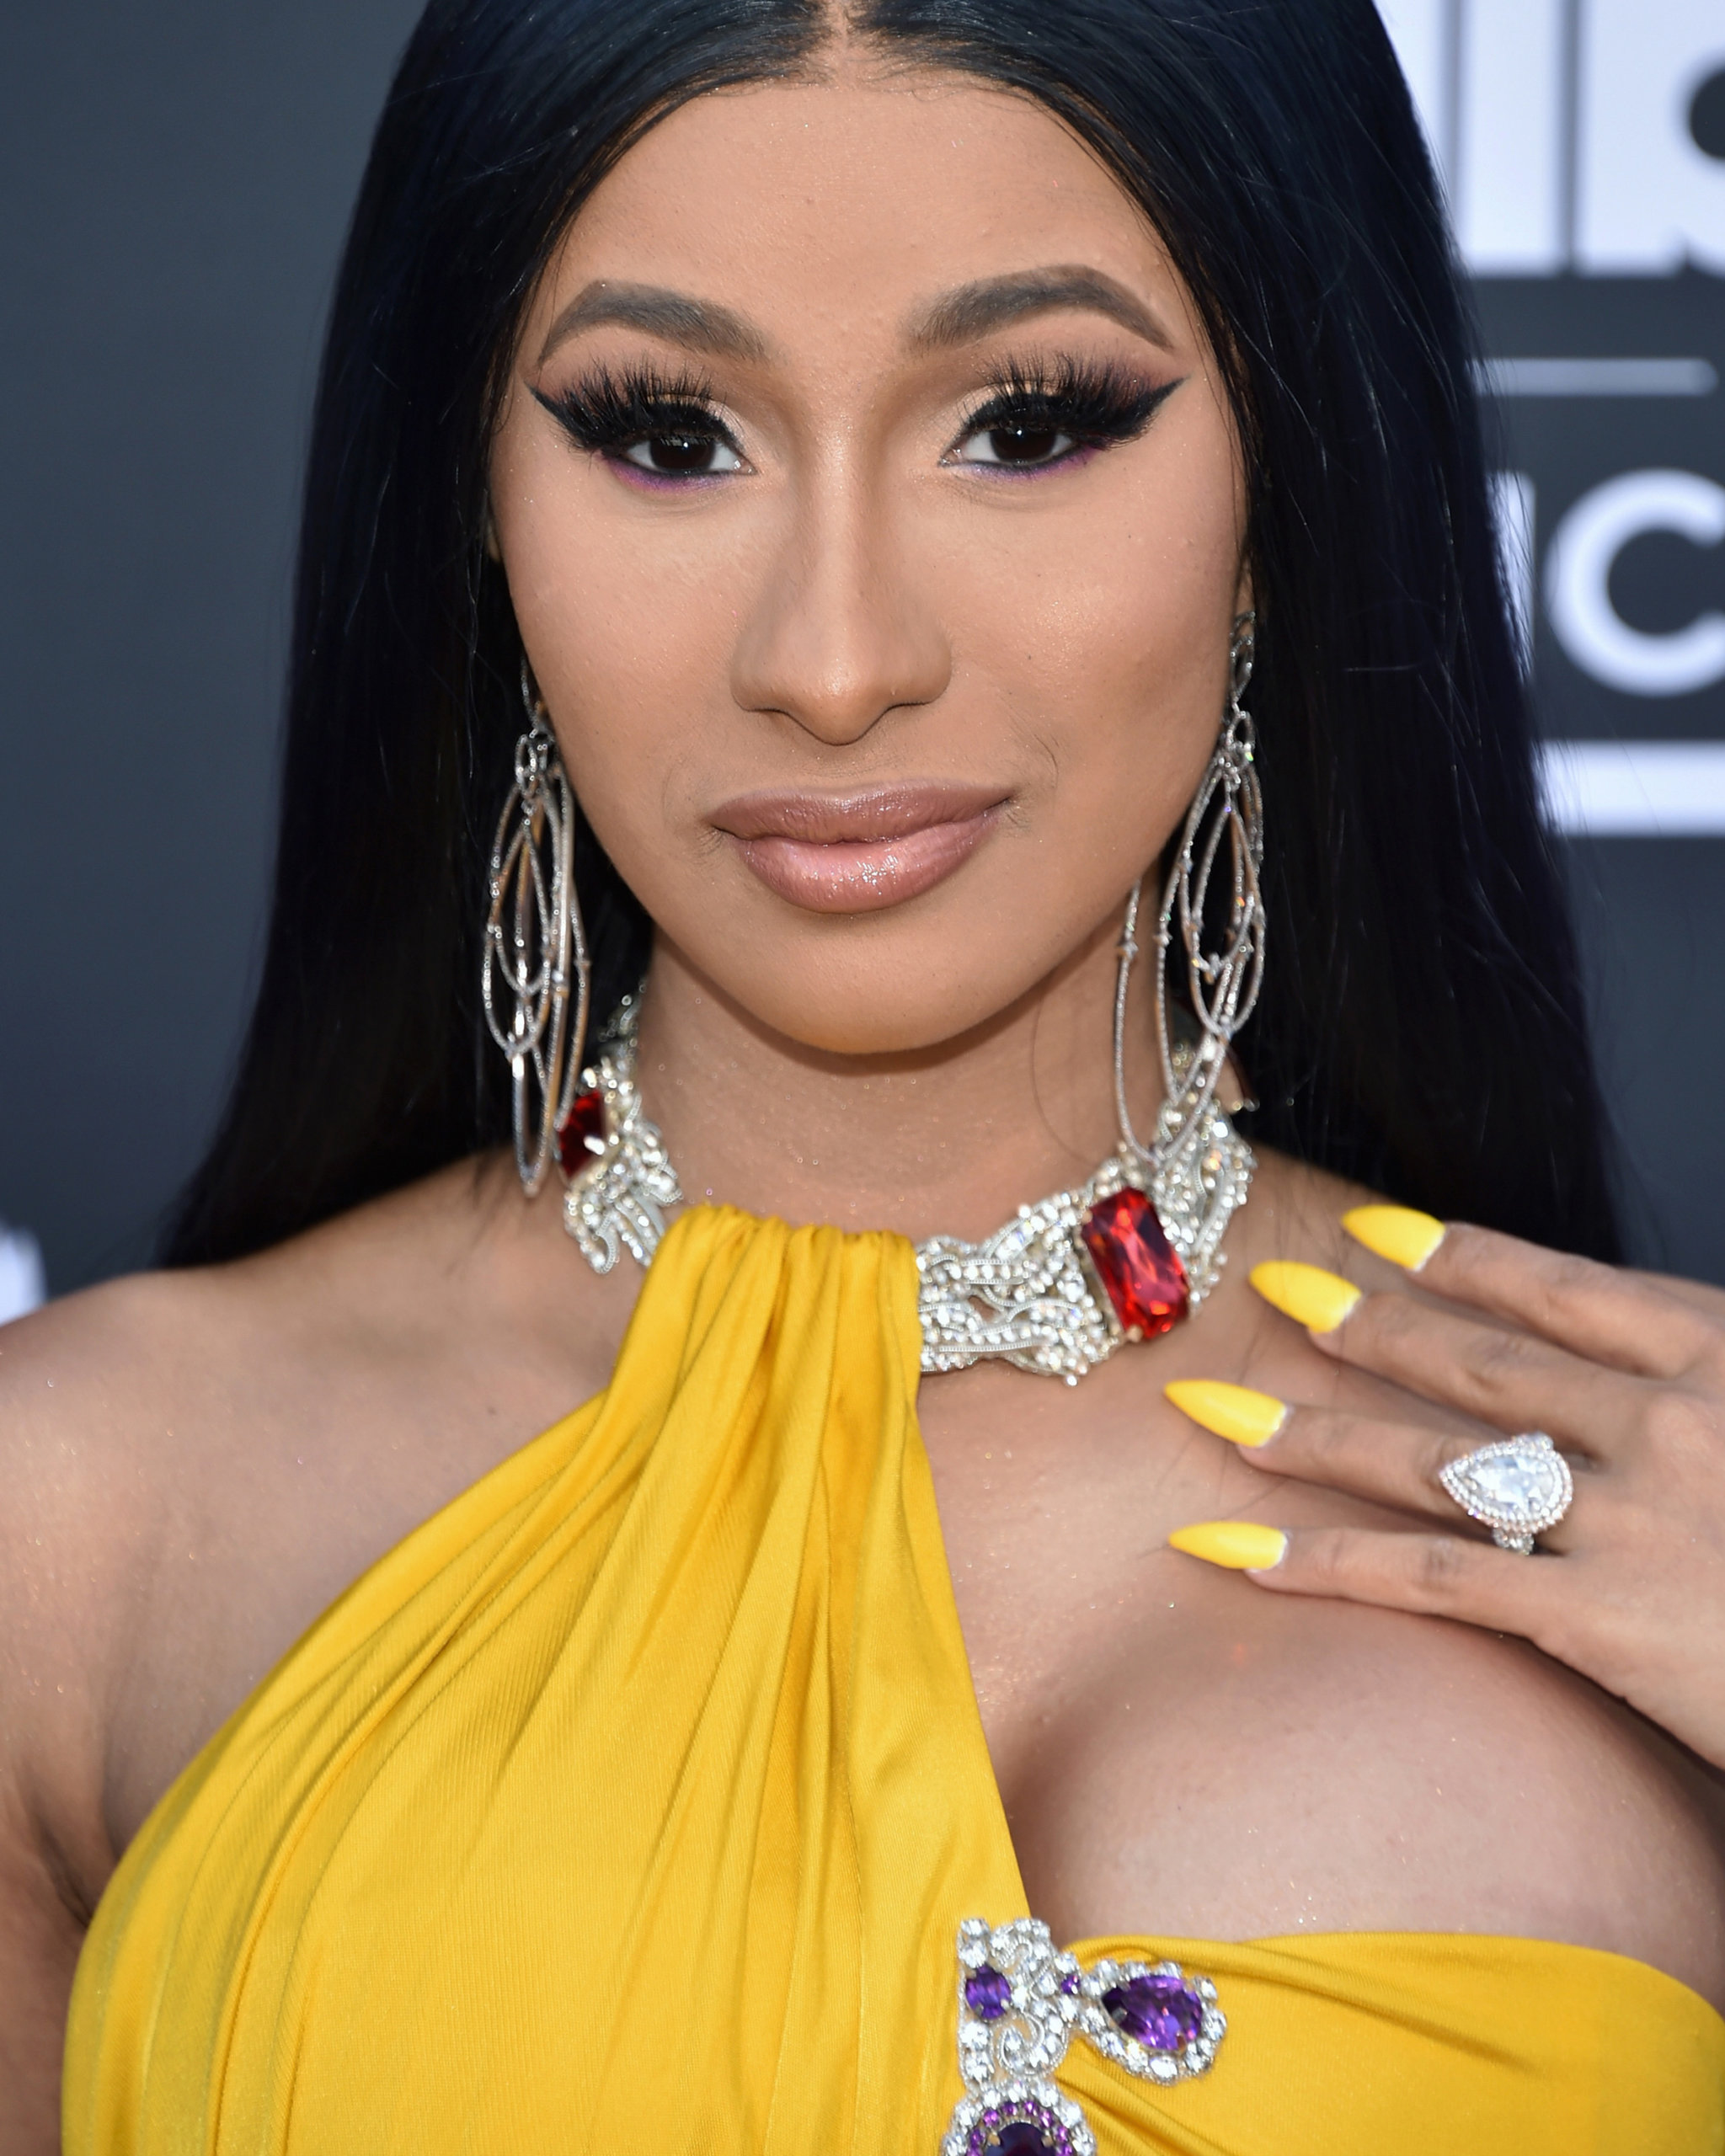 Cardi B red carpet look at the 2019 Billboard Music Award putting on display the infamous Cardi B engagement ring featuring a pear shaped diamond and layered diamond hoop earrings from Loree Rodkin